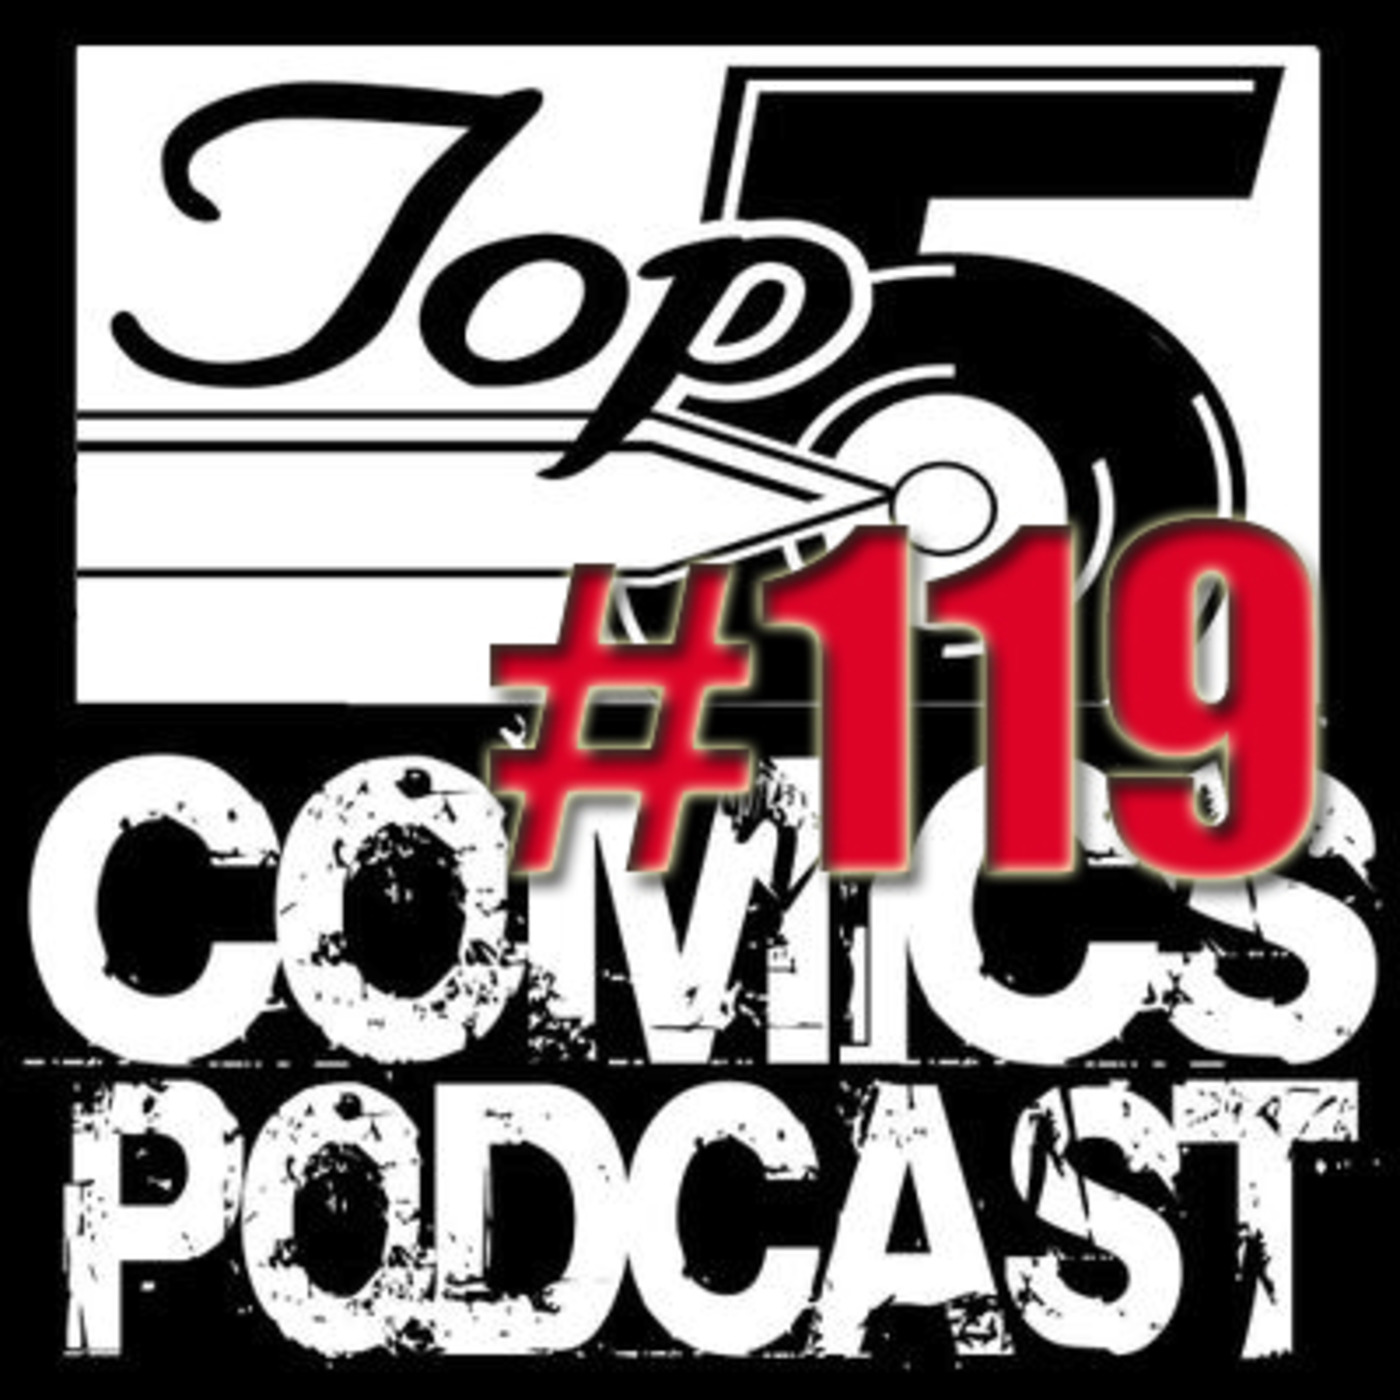 Episode 119 - Coming In 2019